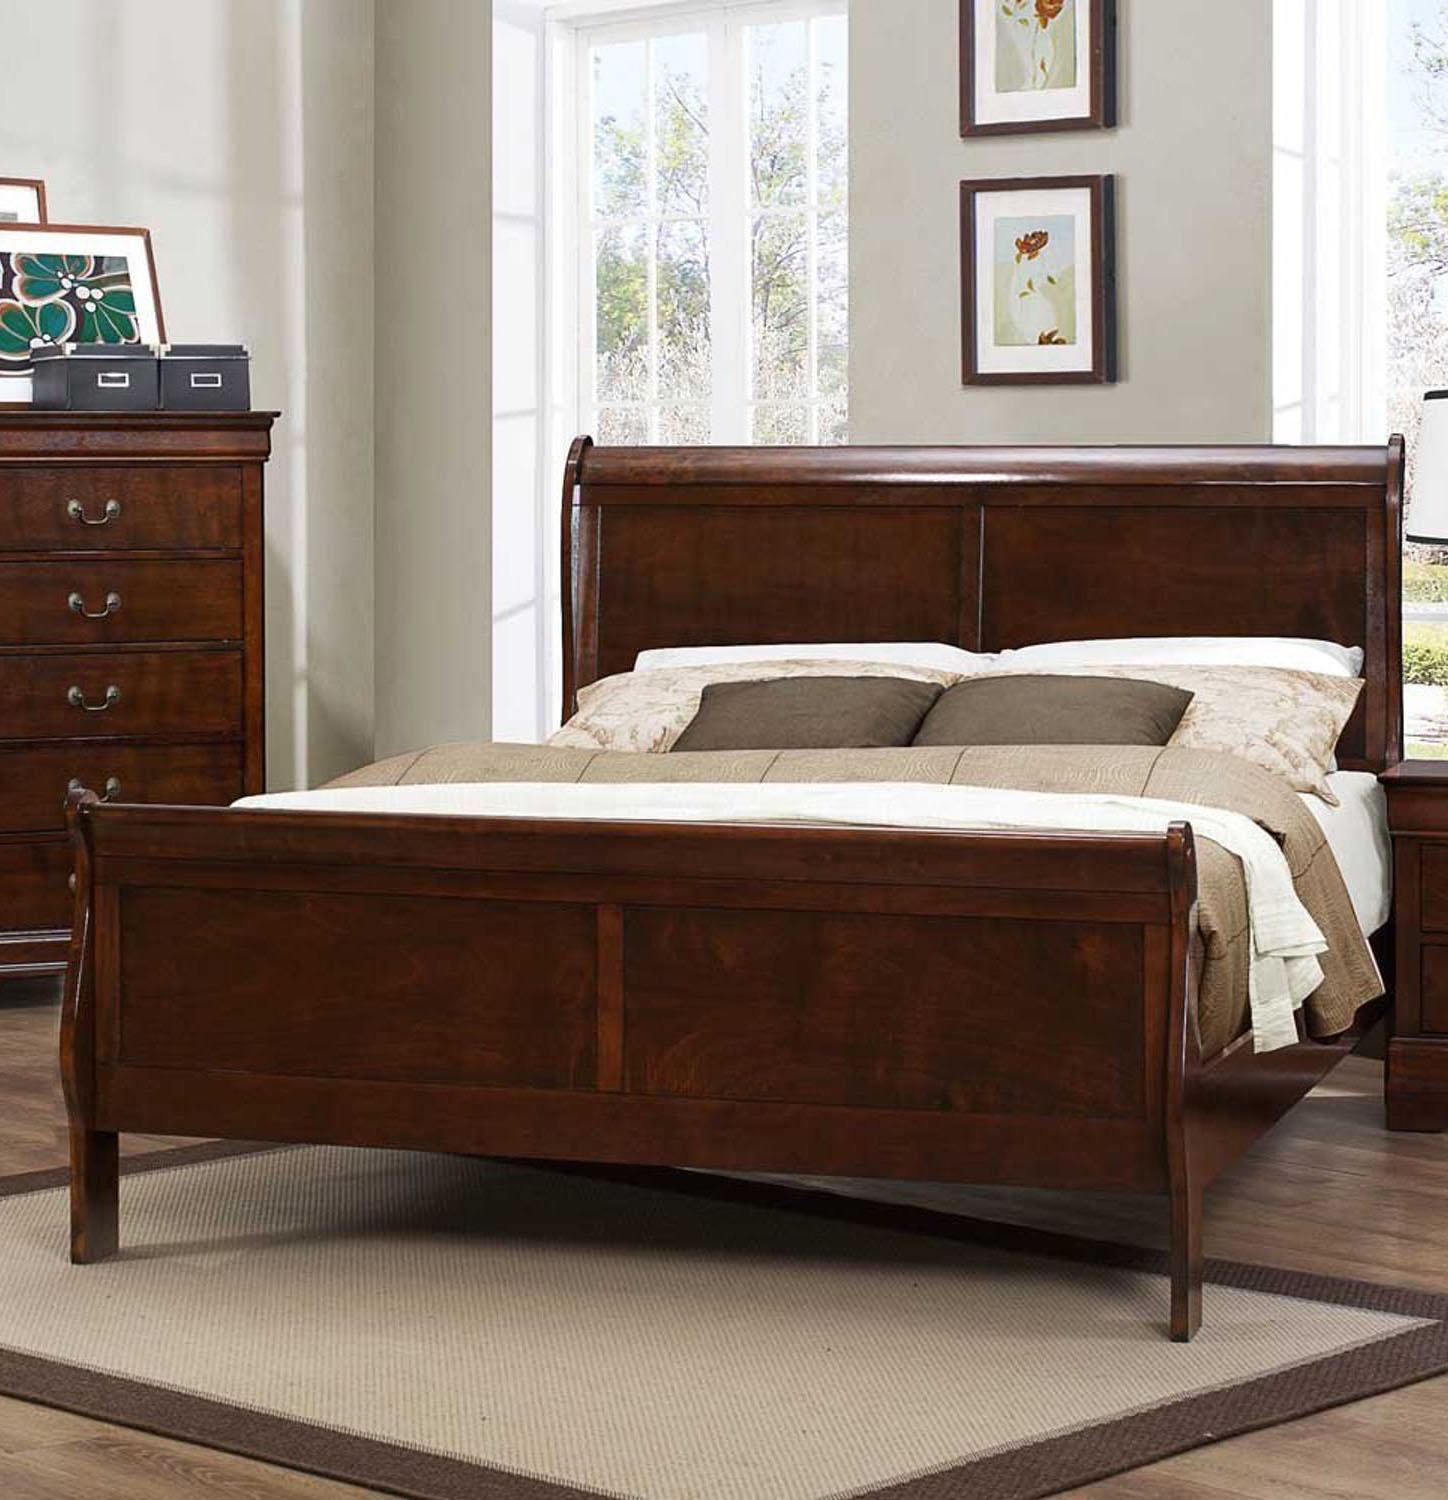 Homelegance Maryville Queen Sleigh Bed – The Furniture Space.